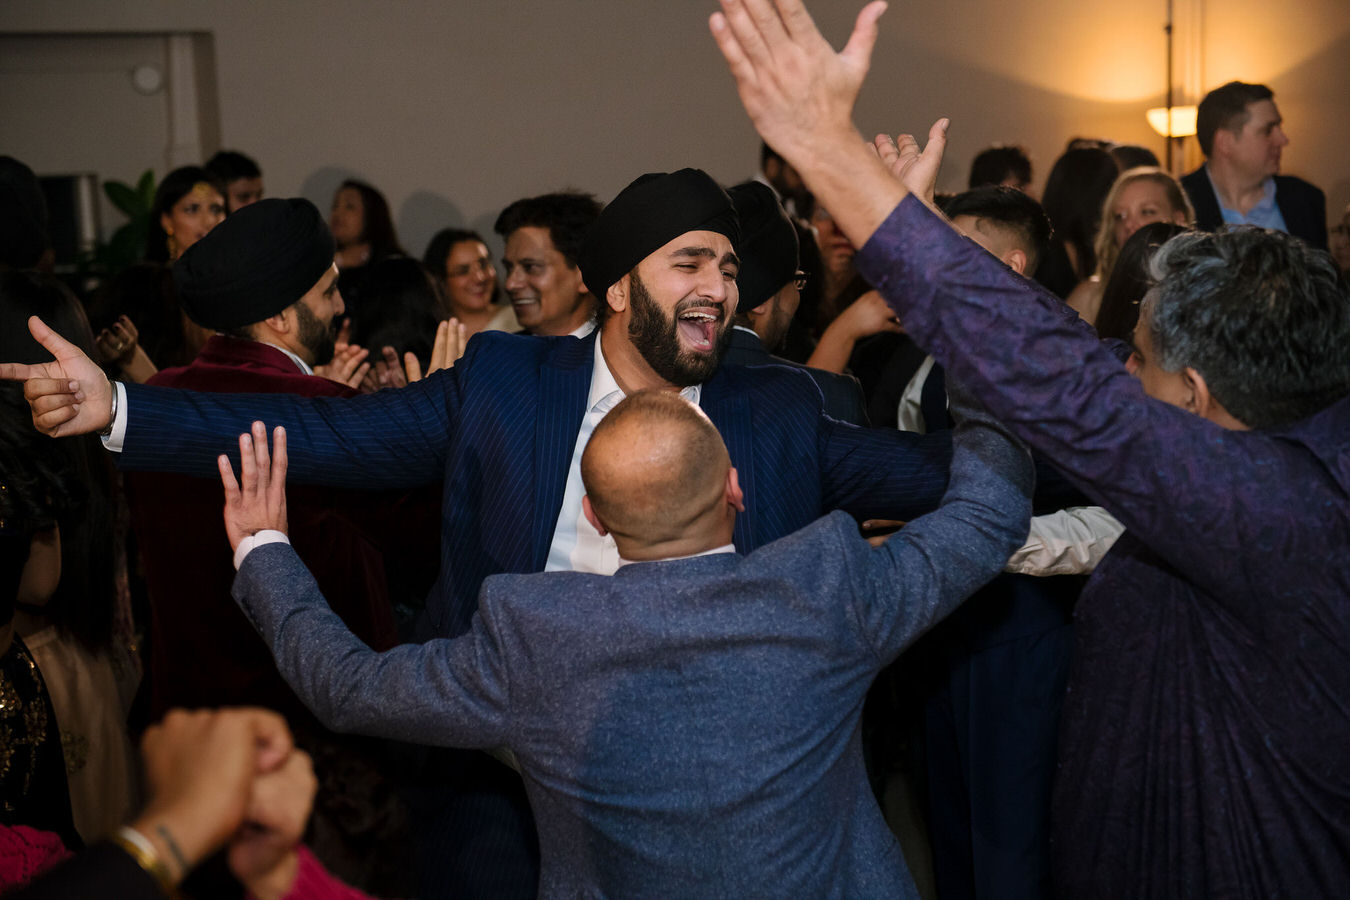 Sikh Asian wedding man’s are singing Indian songs with their arms up in the air.